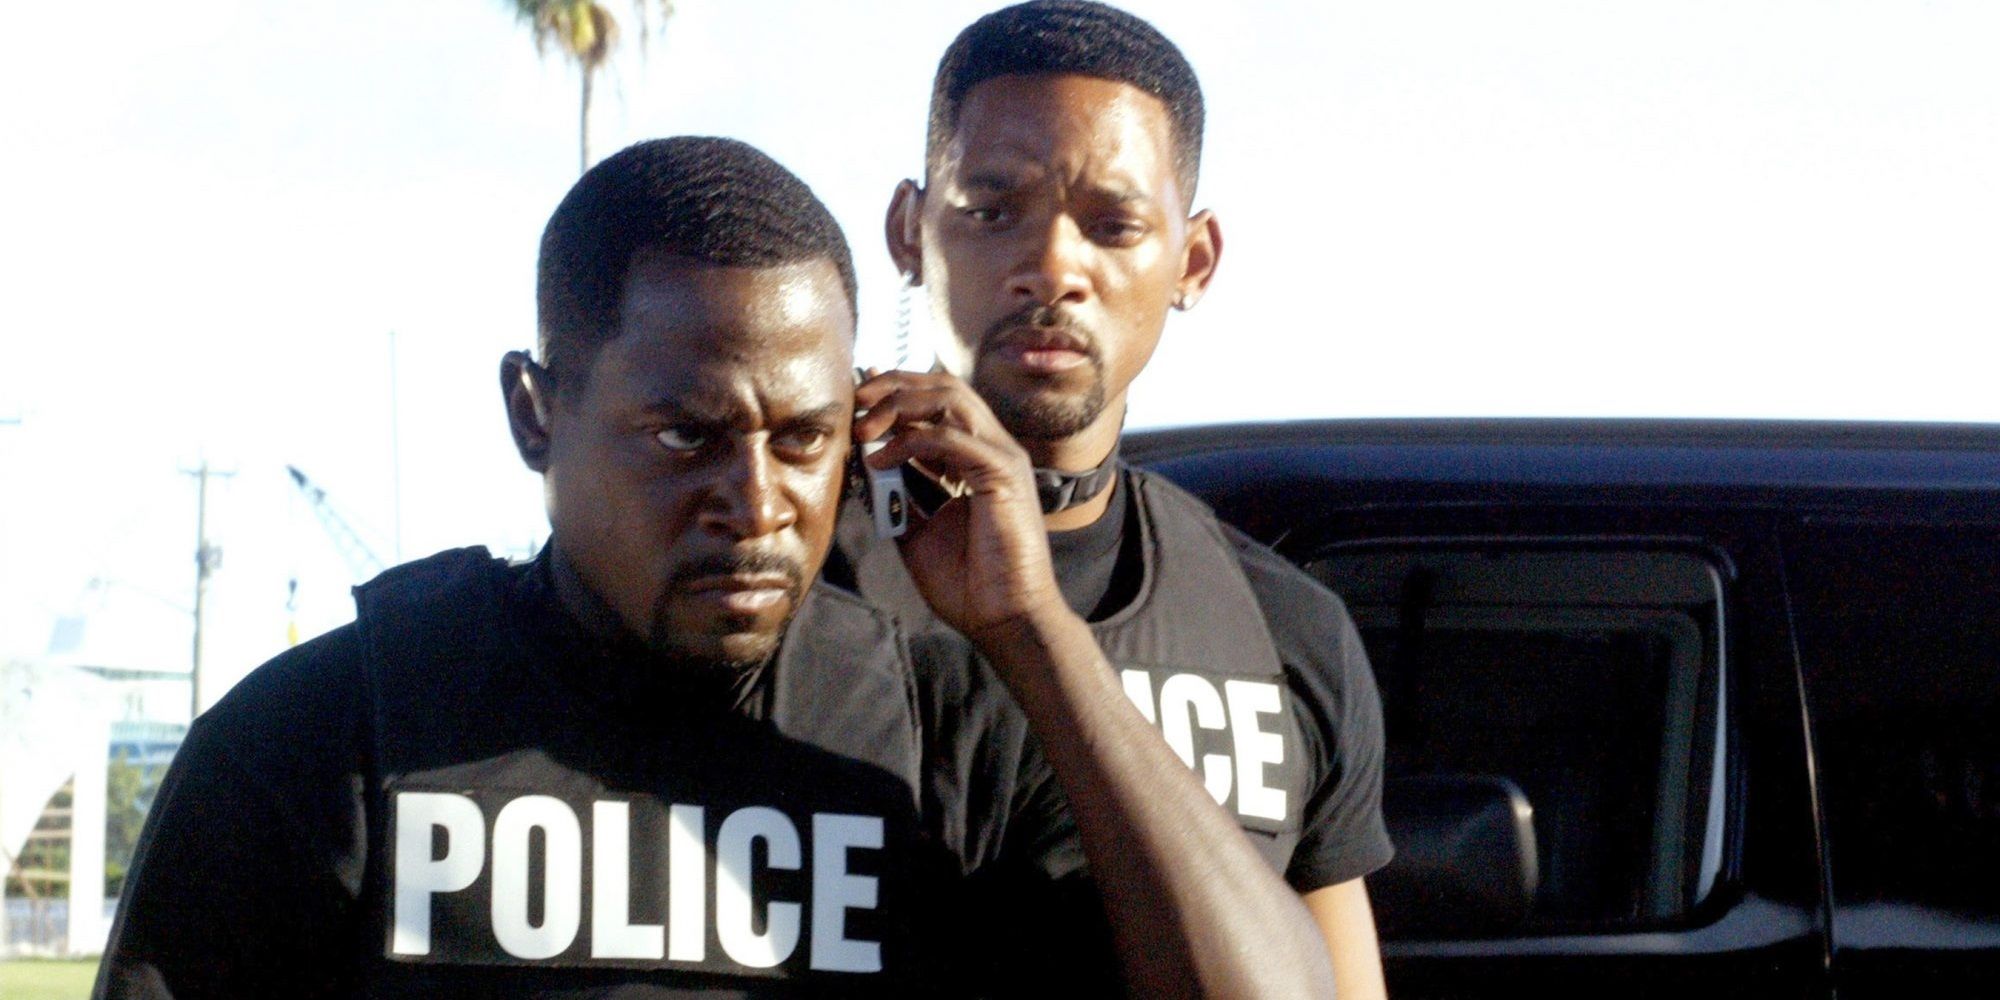 Bad Boys 4 Almost Certainly Won't Break Will Smith's 2 Biggest Box Office Records